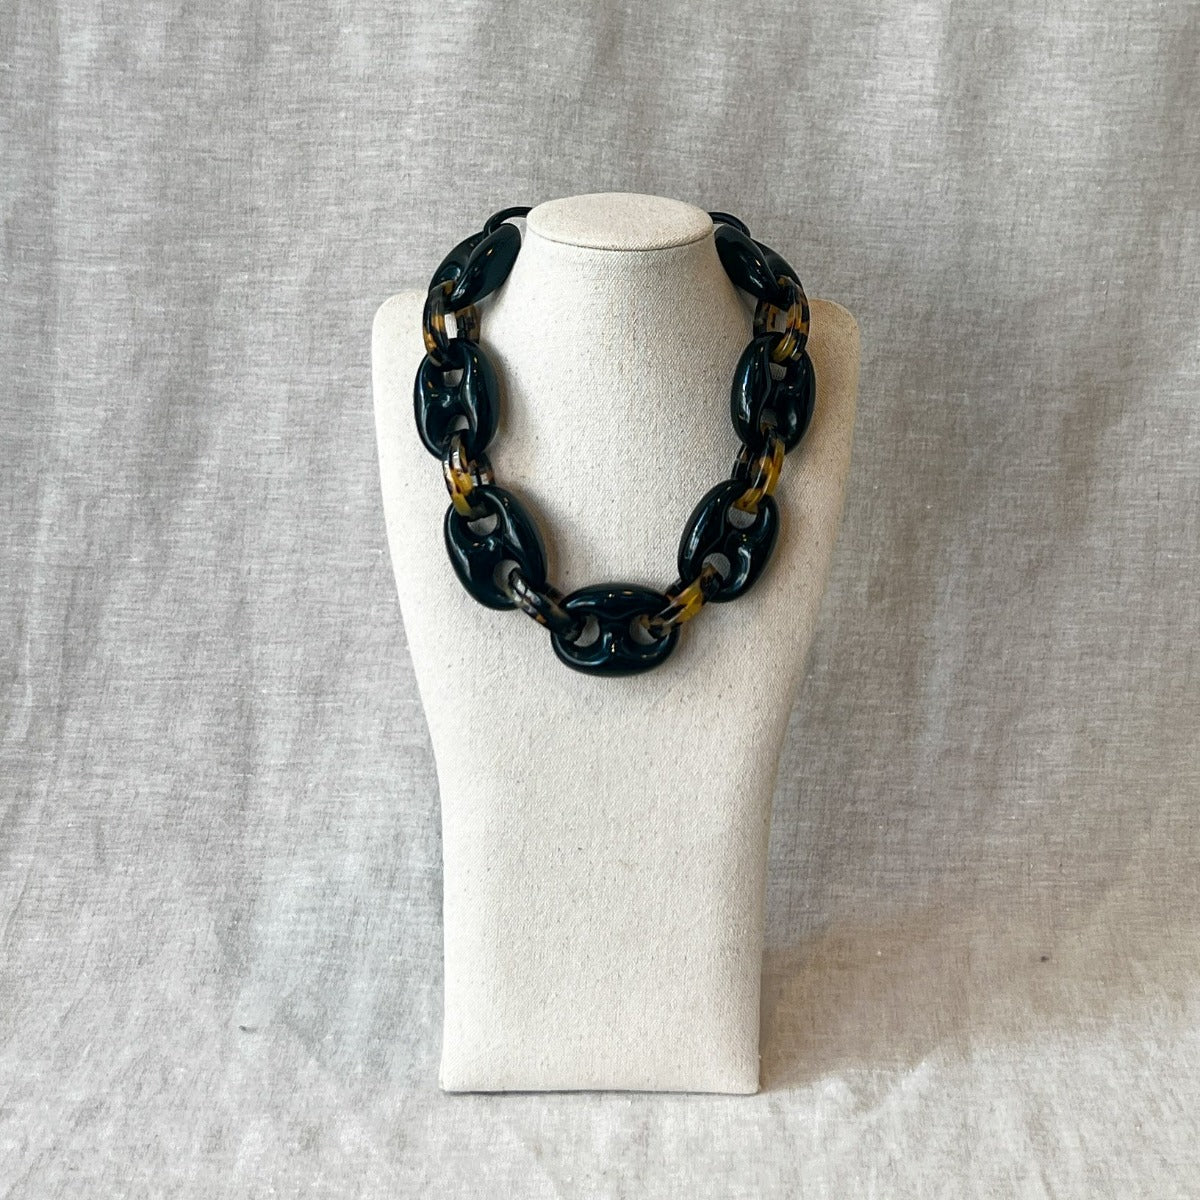 Chain Link Choker Necklace